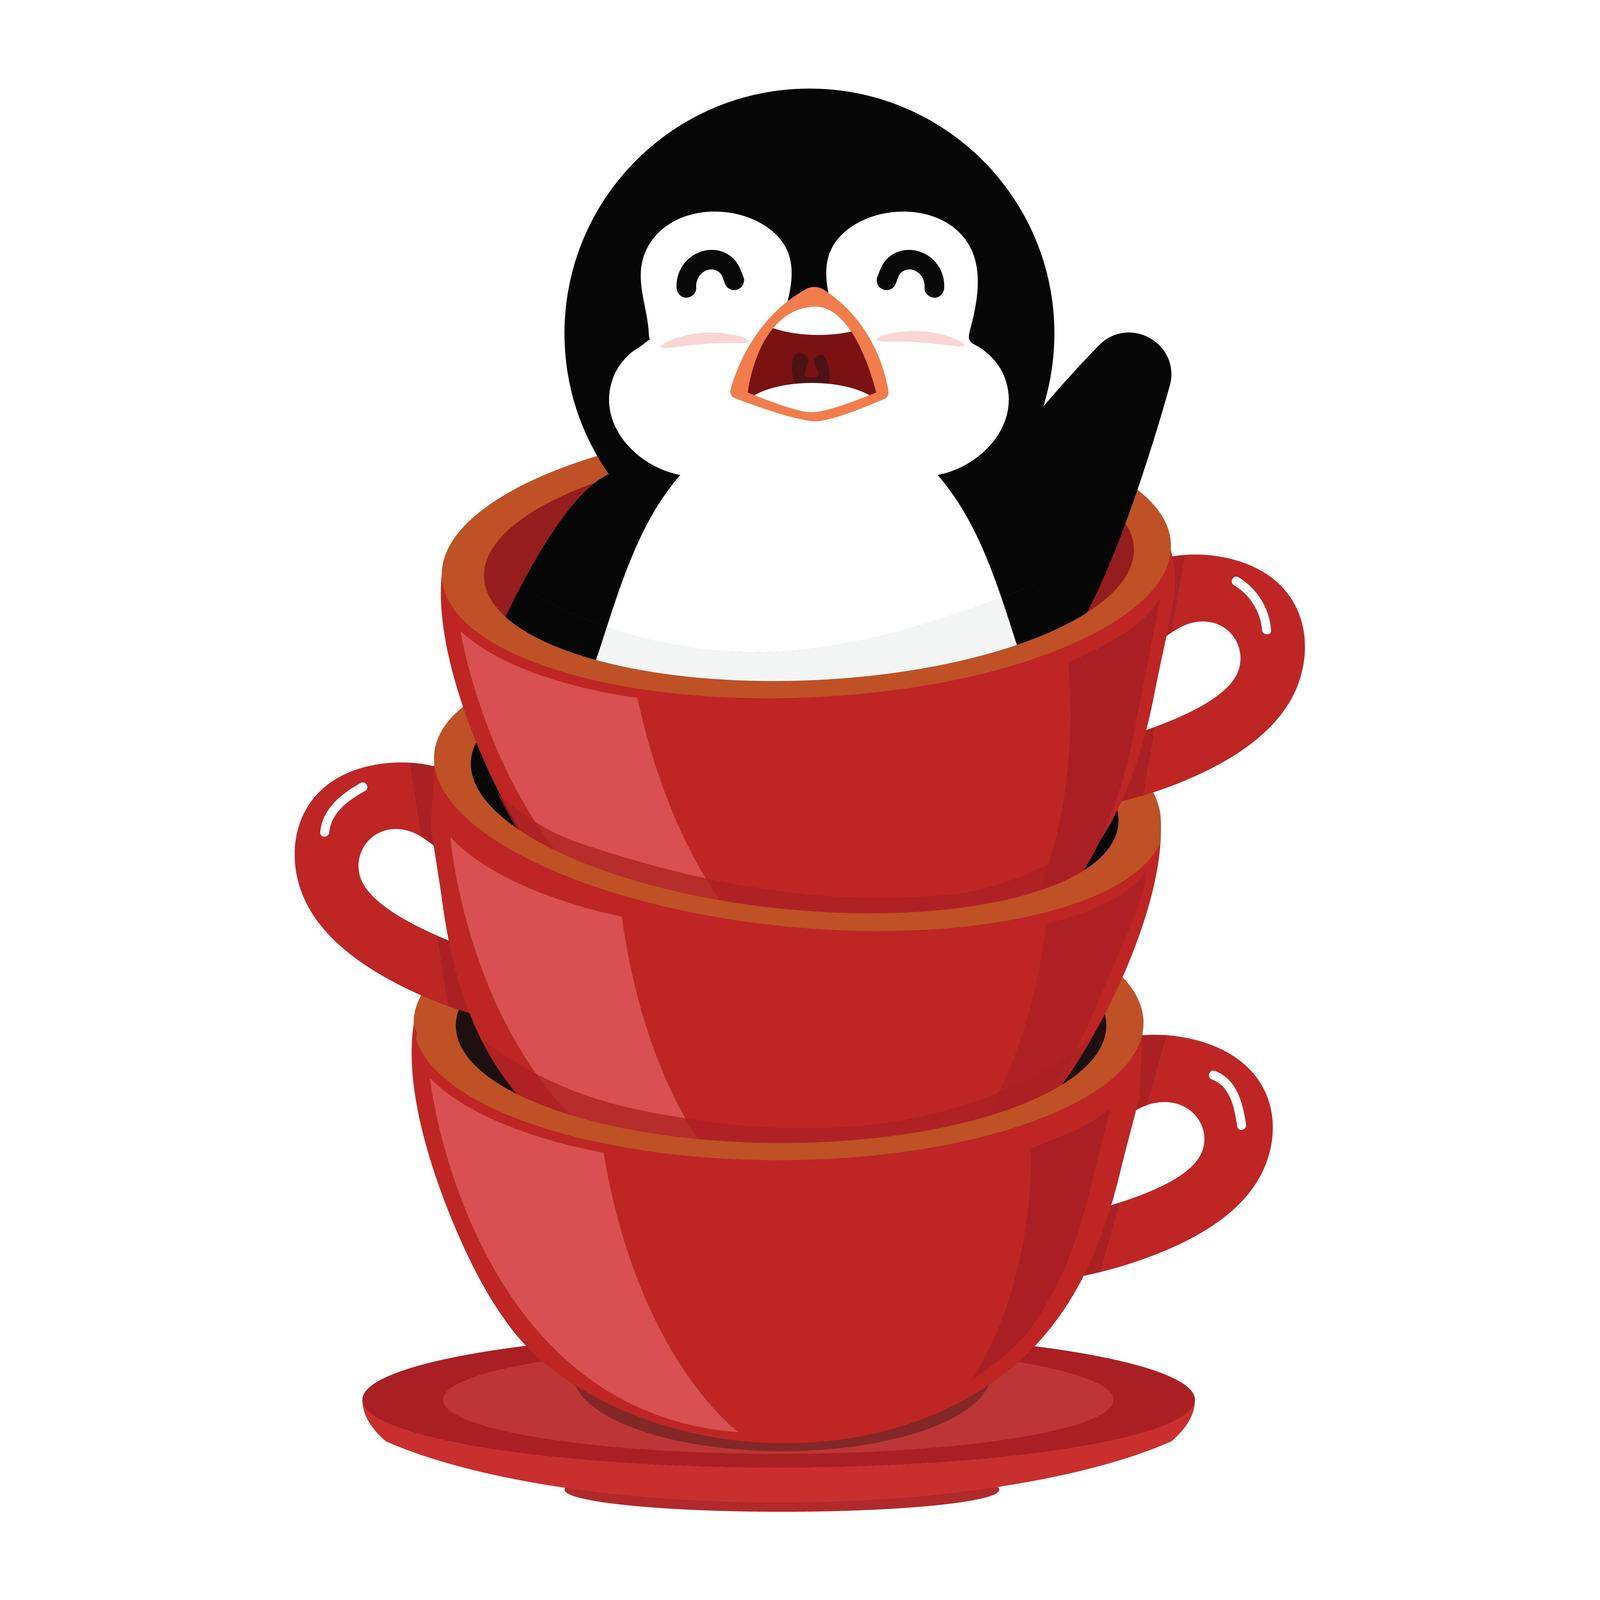 Stack of red cups with penguin by focus_bell